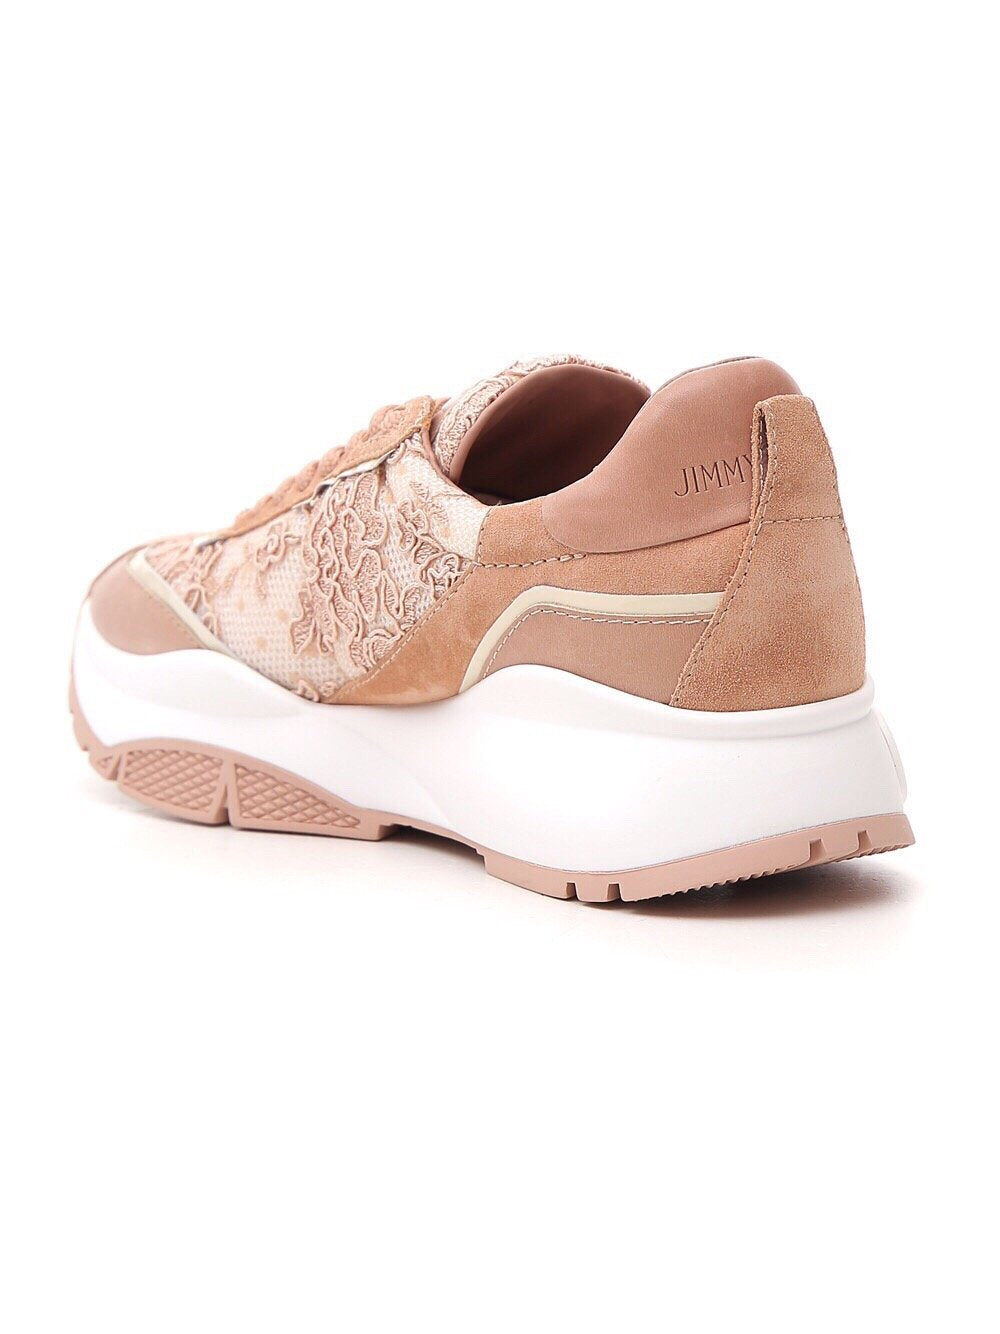 Jimy Chu  Lace Sneakers 3 Colors